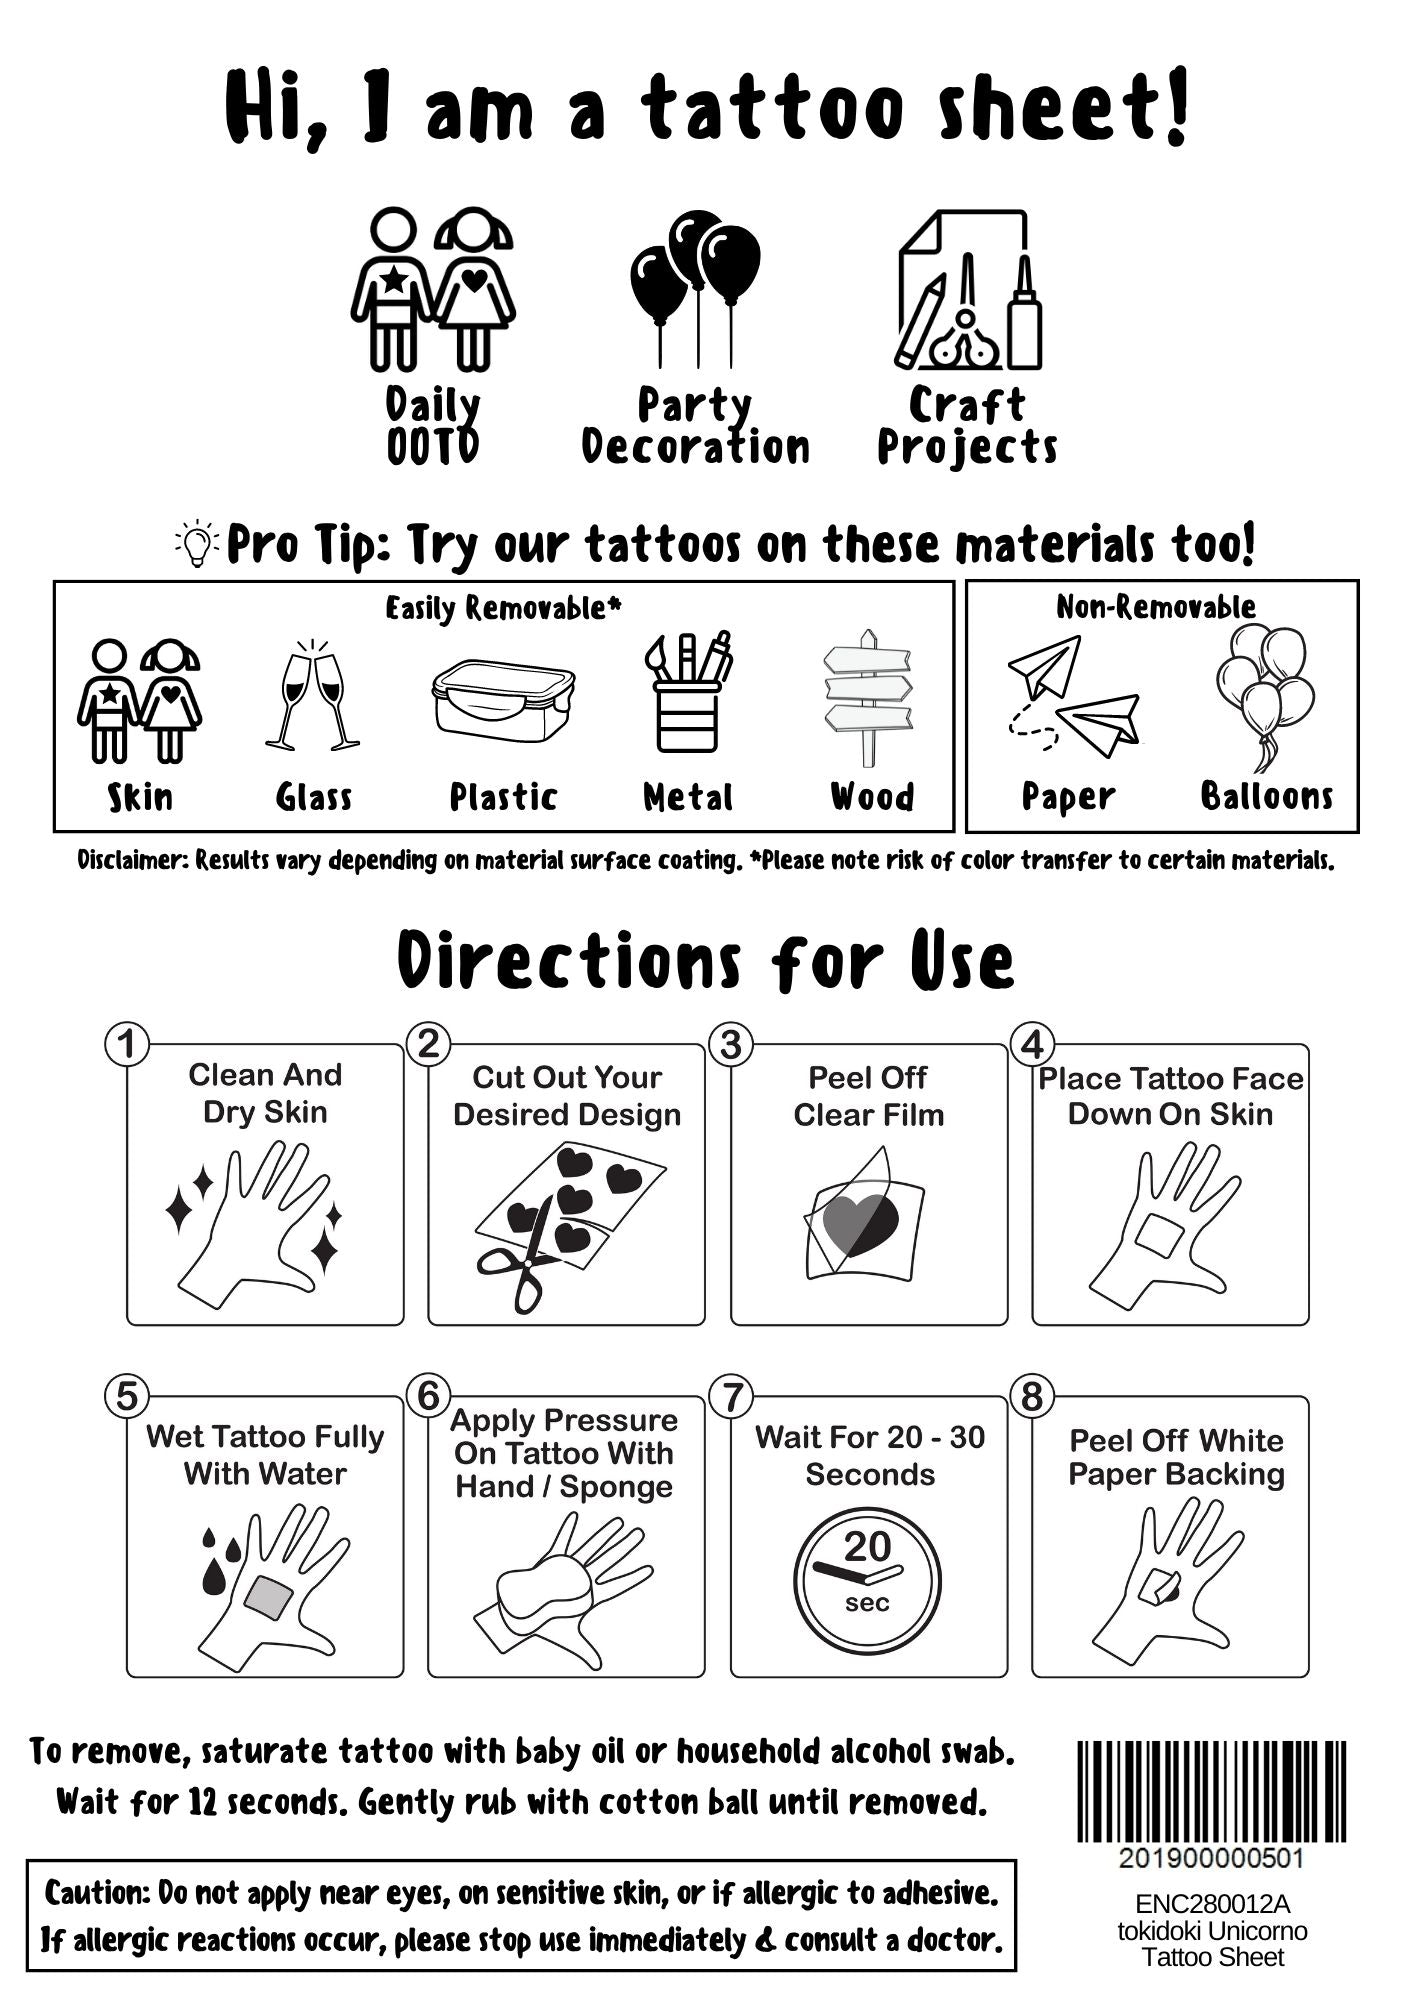 Tattoo Care Instructions  Fill Online Printable Fillable Blank   pdfFiller